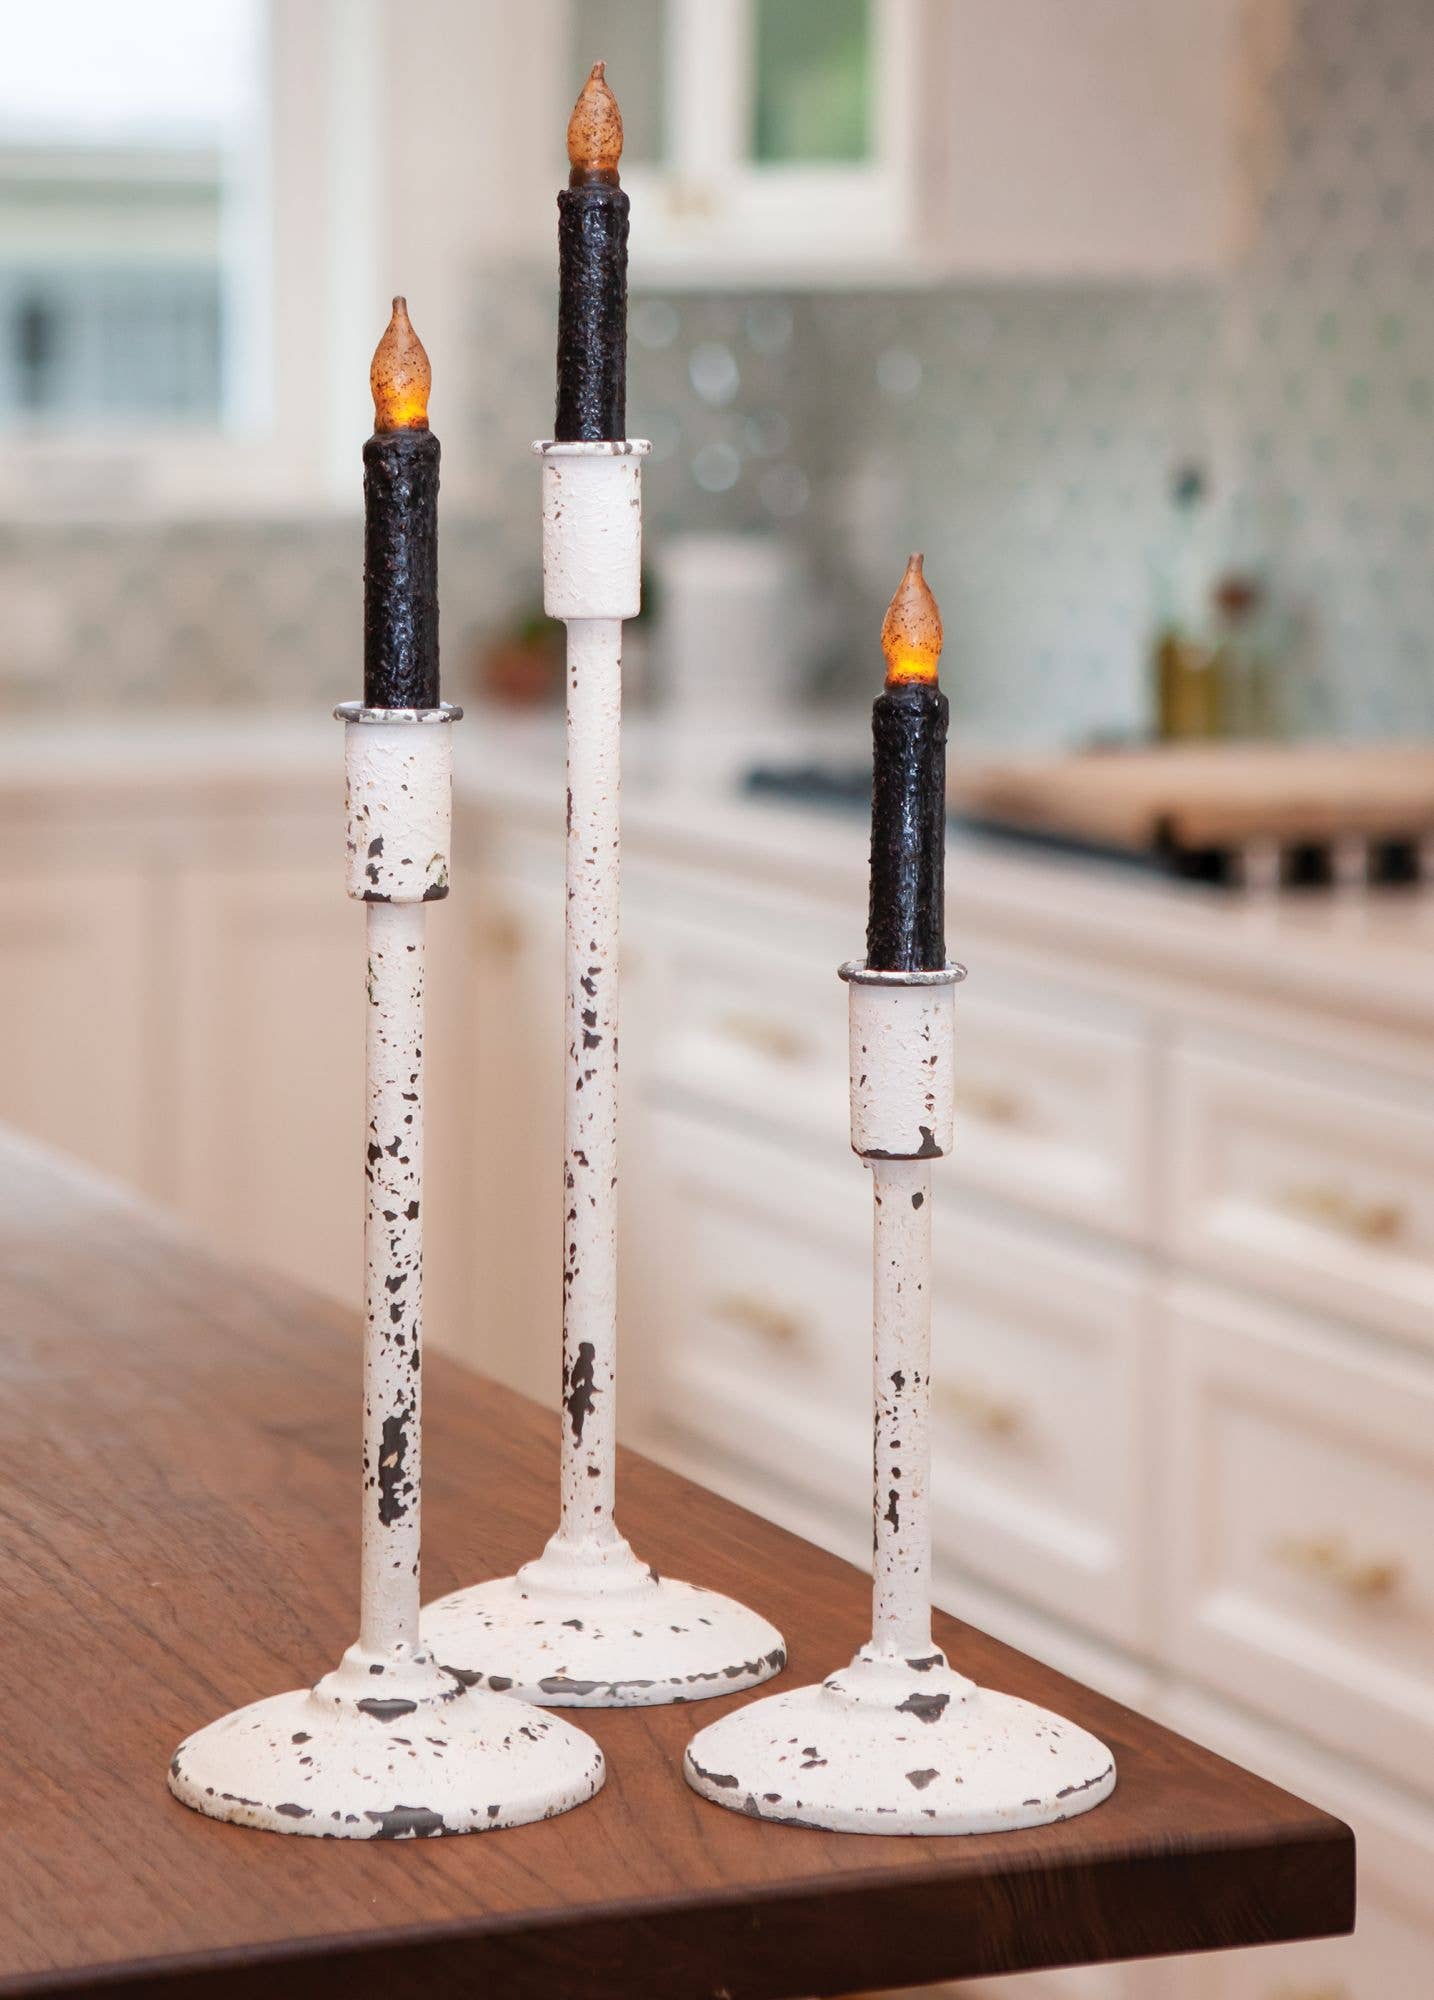 Distressed Candle Holder